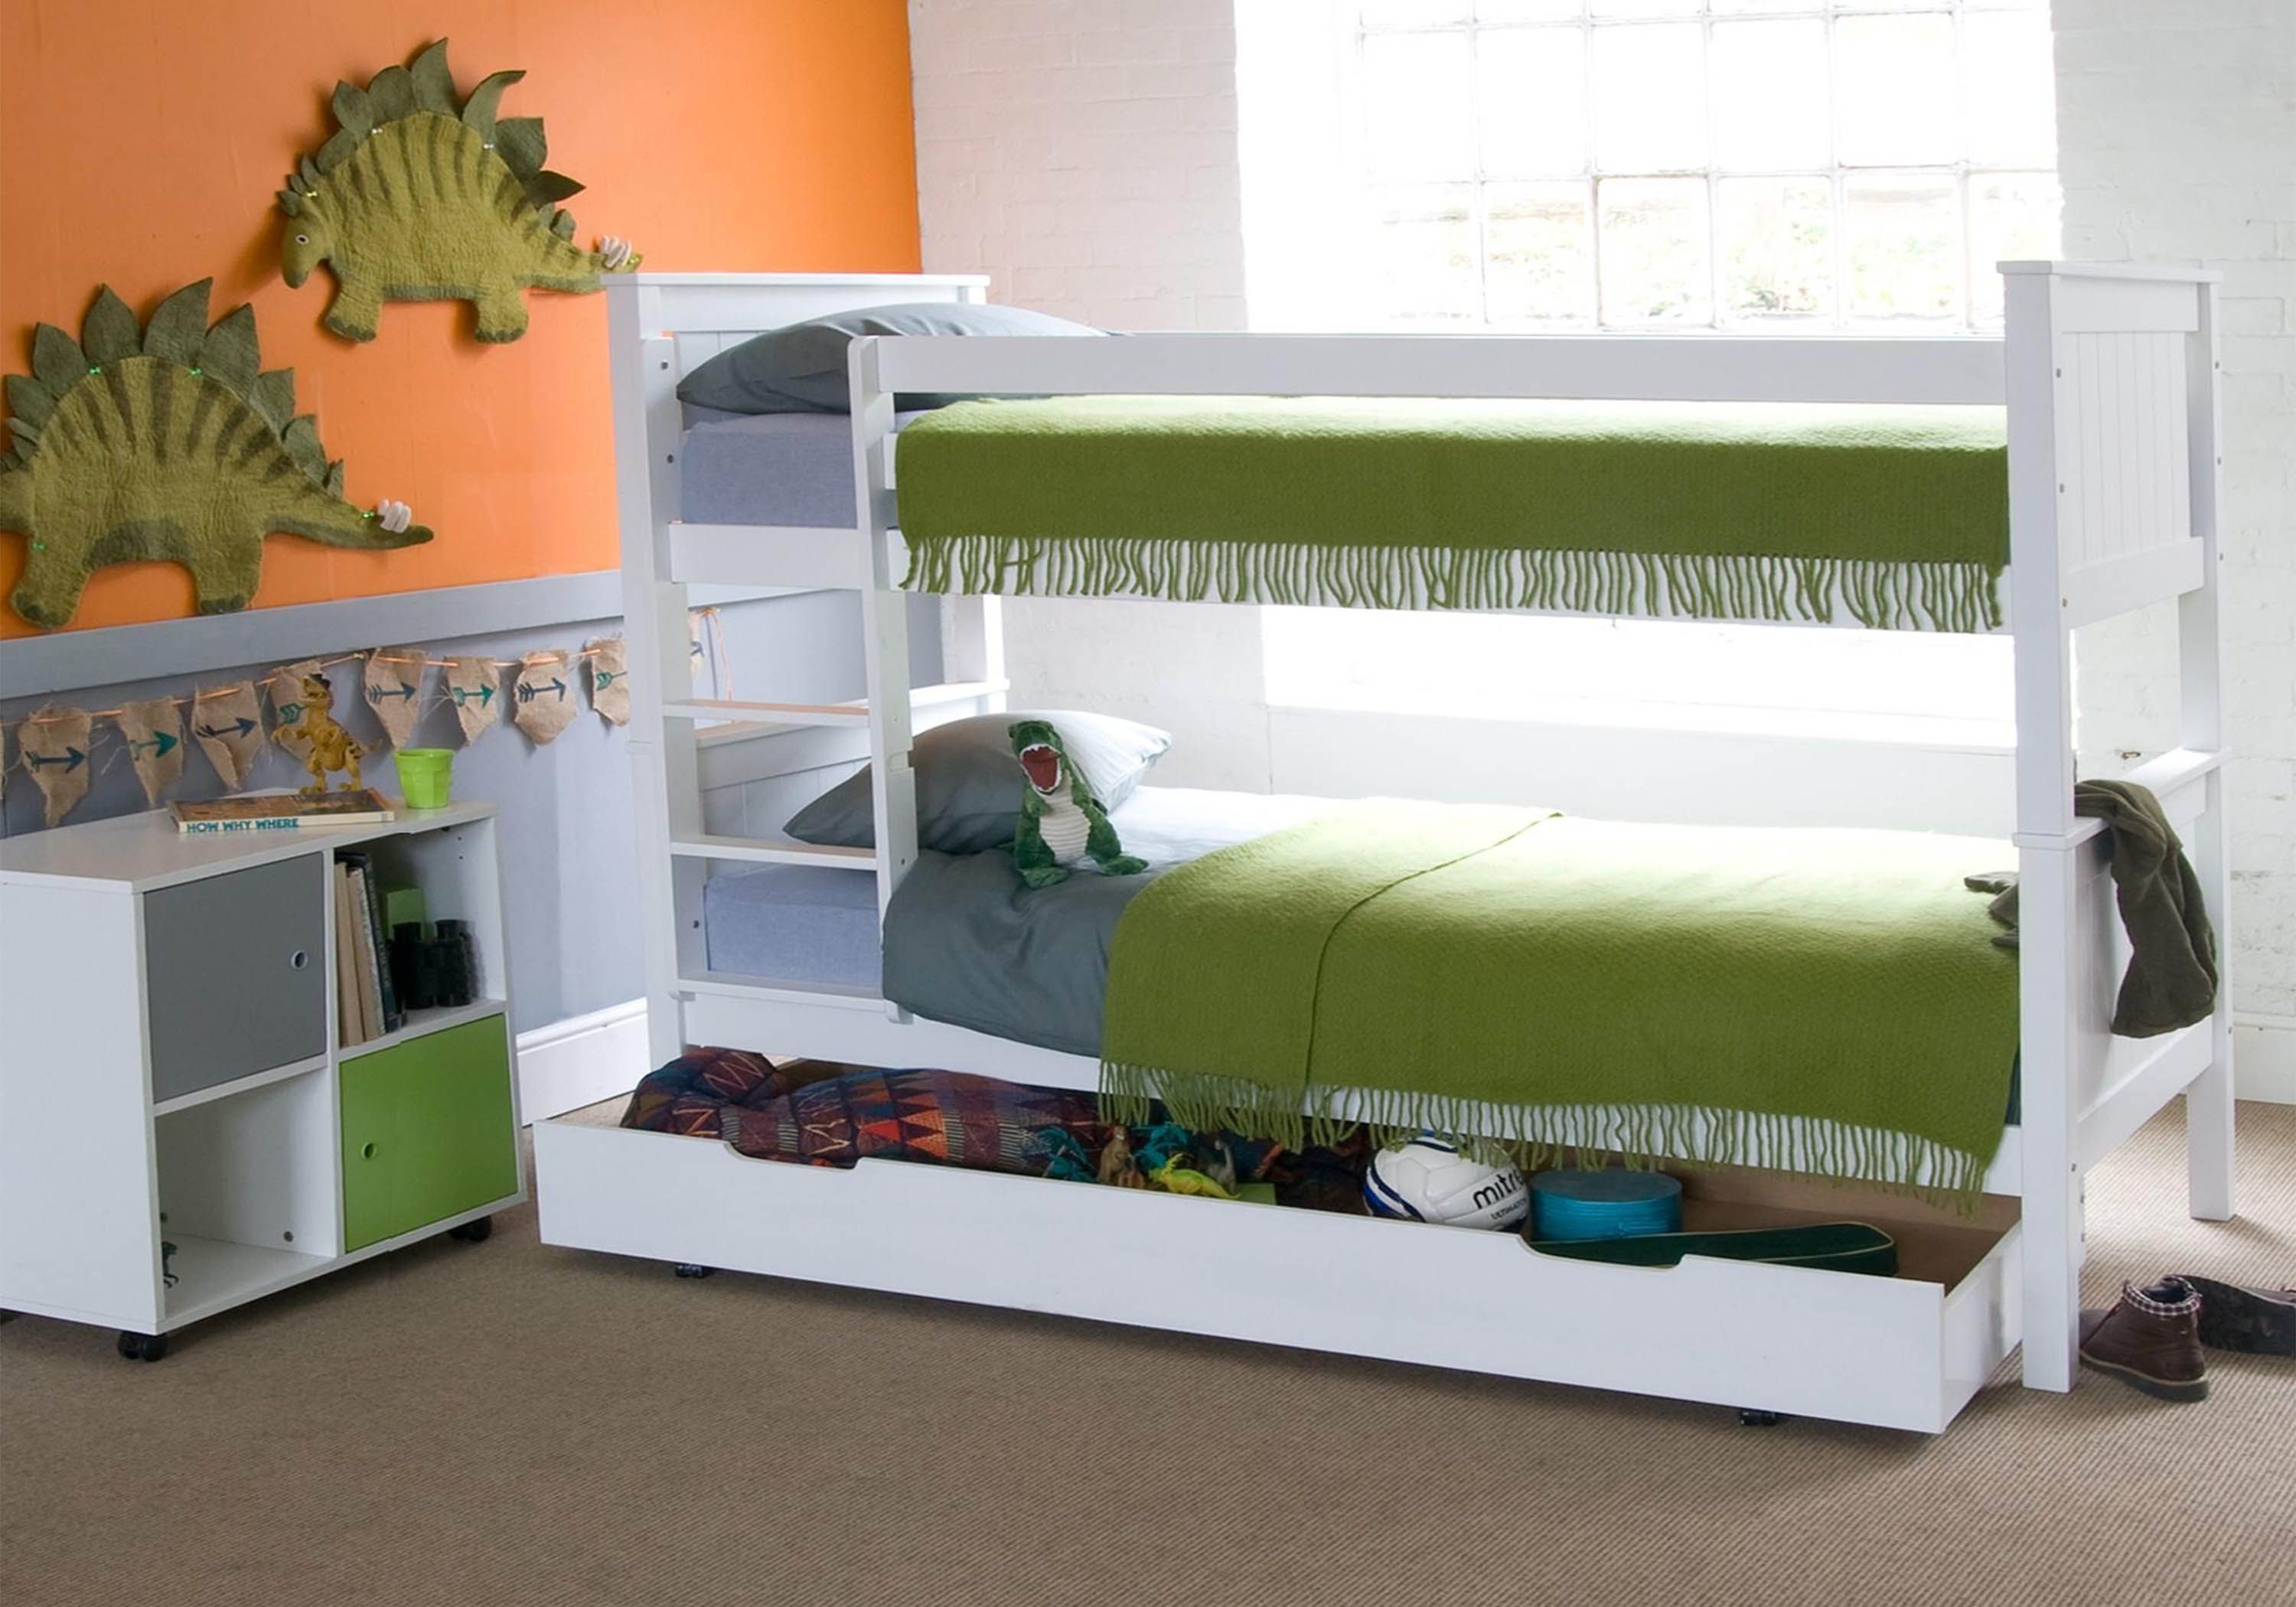 Little Folks Furniture Classic Beech, Bunk Beds For 100 Dollars Or Less